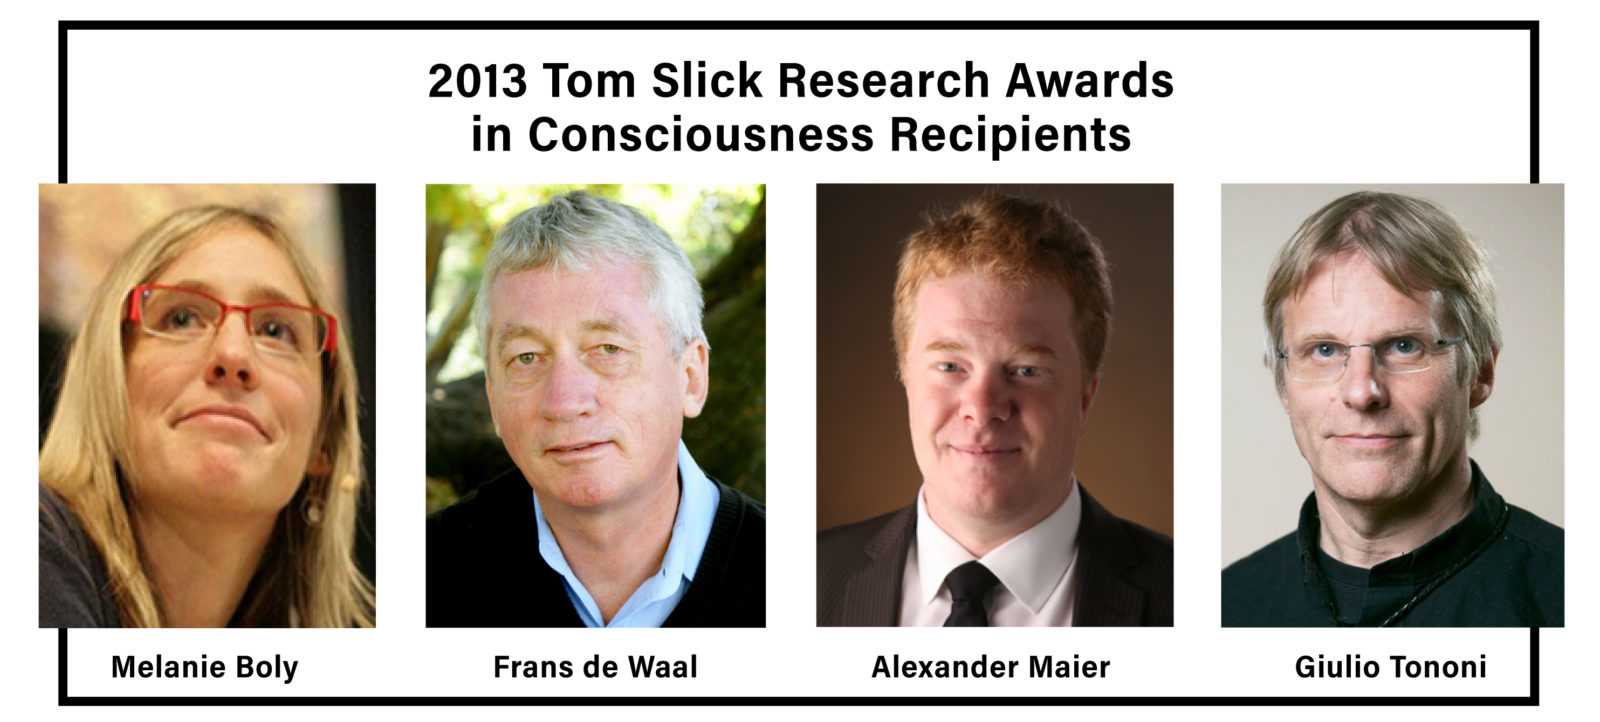 2013 Tom Slick Research Awards in Consciousness